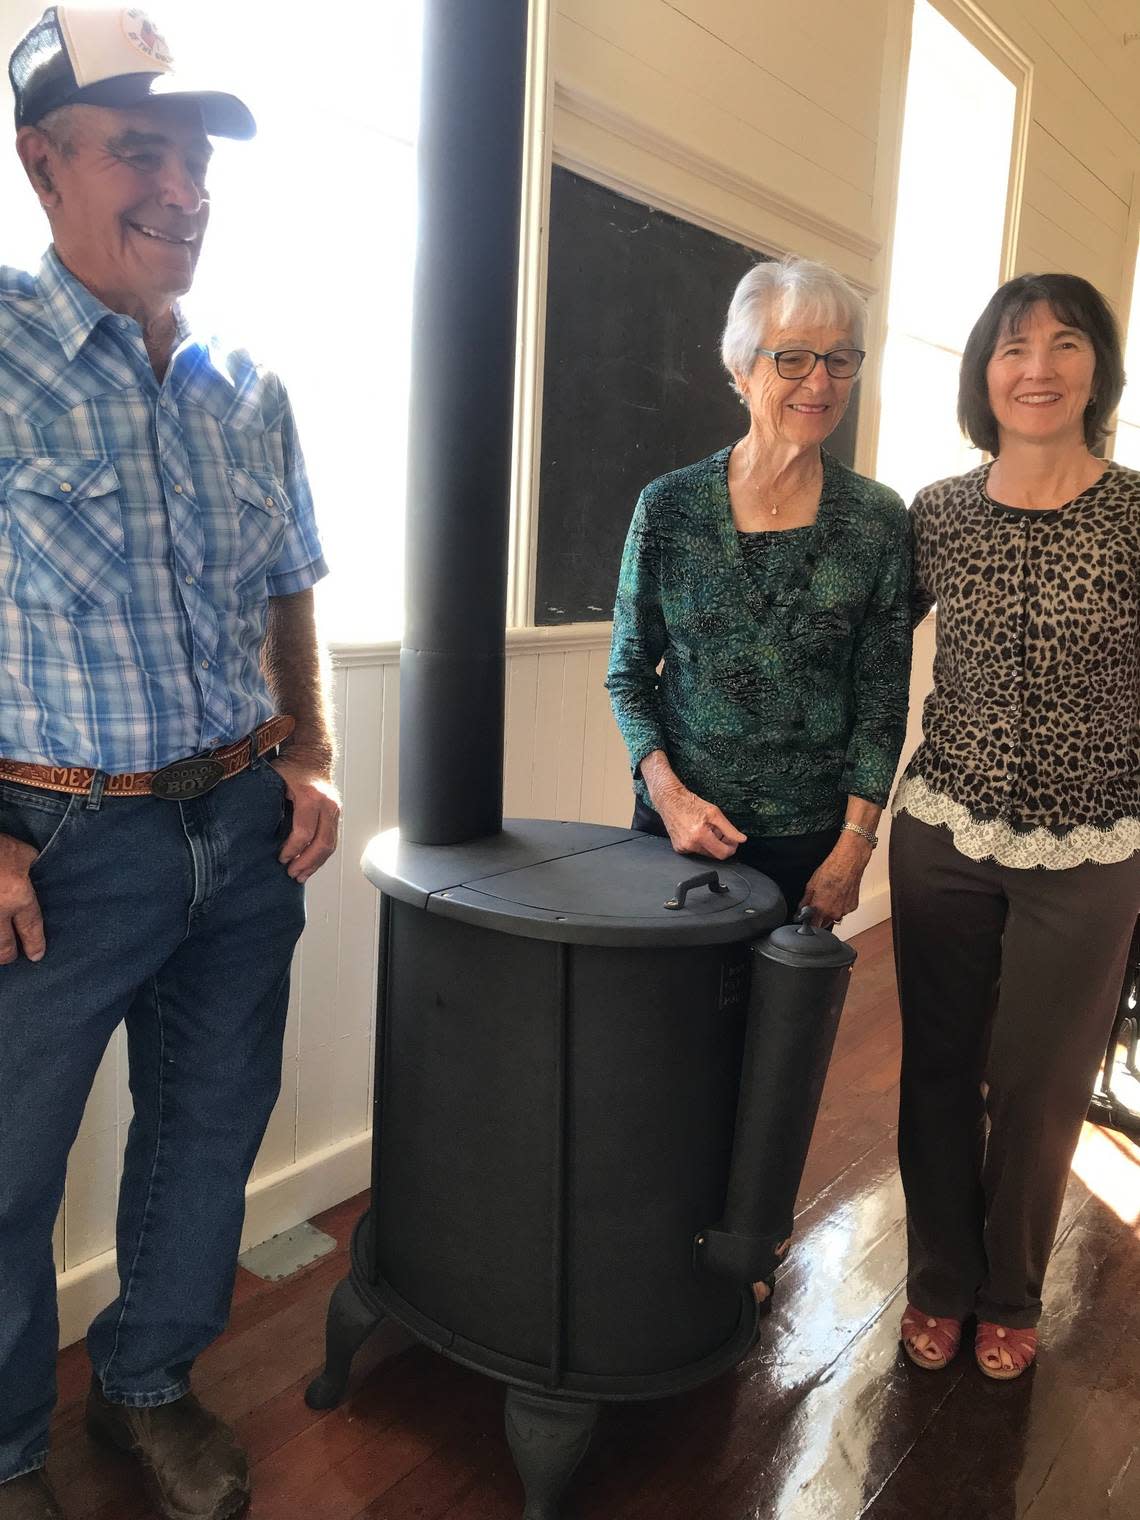 Oly Fiscalini, left, Kathleen Fiscalini Gerhardt and her daughter Debbie Soto gather around a historic stove that Paul and Brian Snow had restored and reinstalled for free. They and their parents, Curt Snow and Karen Soto Snow, also are members of pioneer Cambria families.